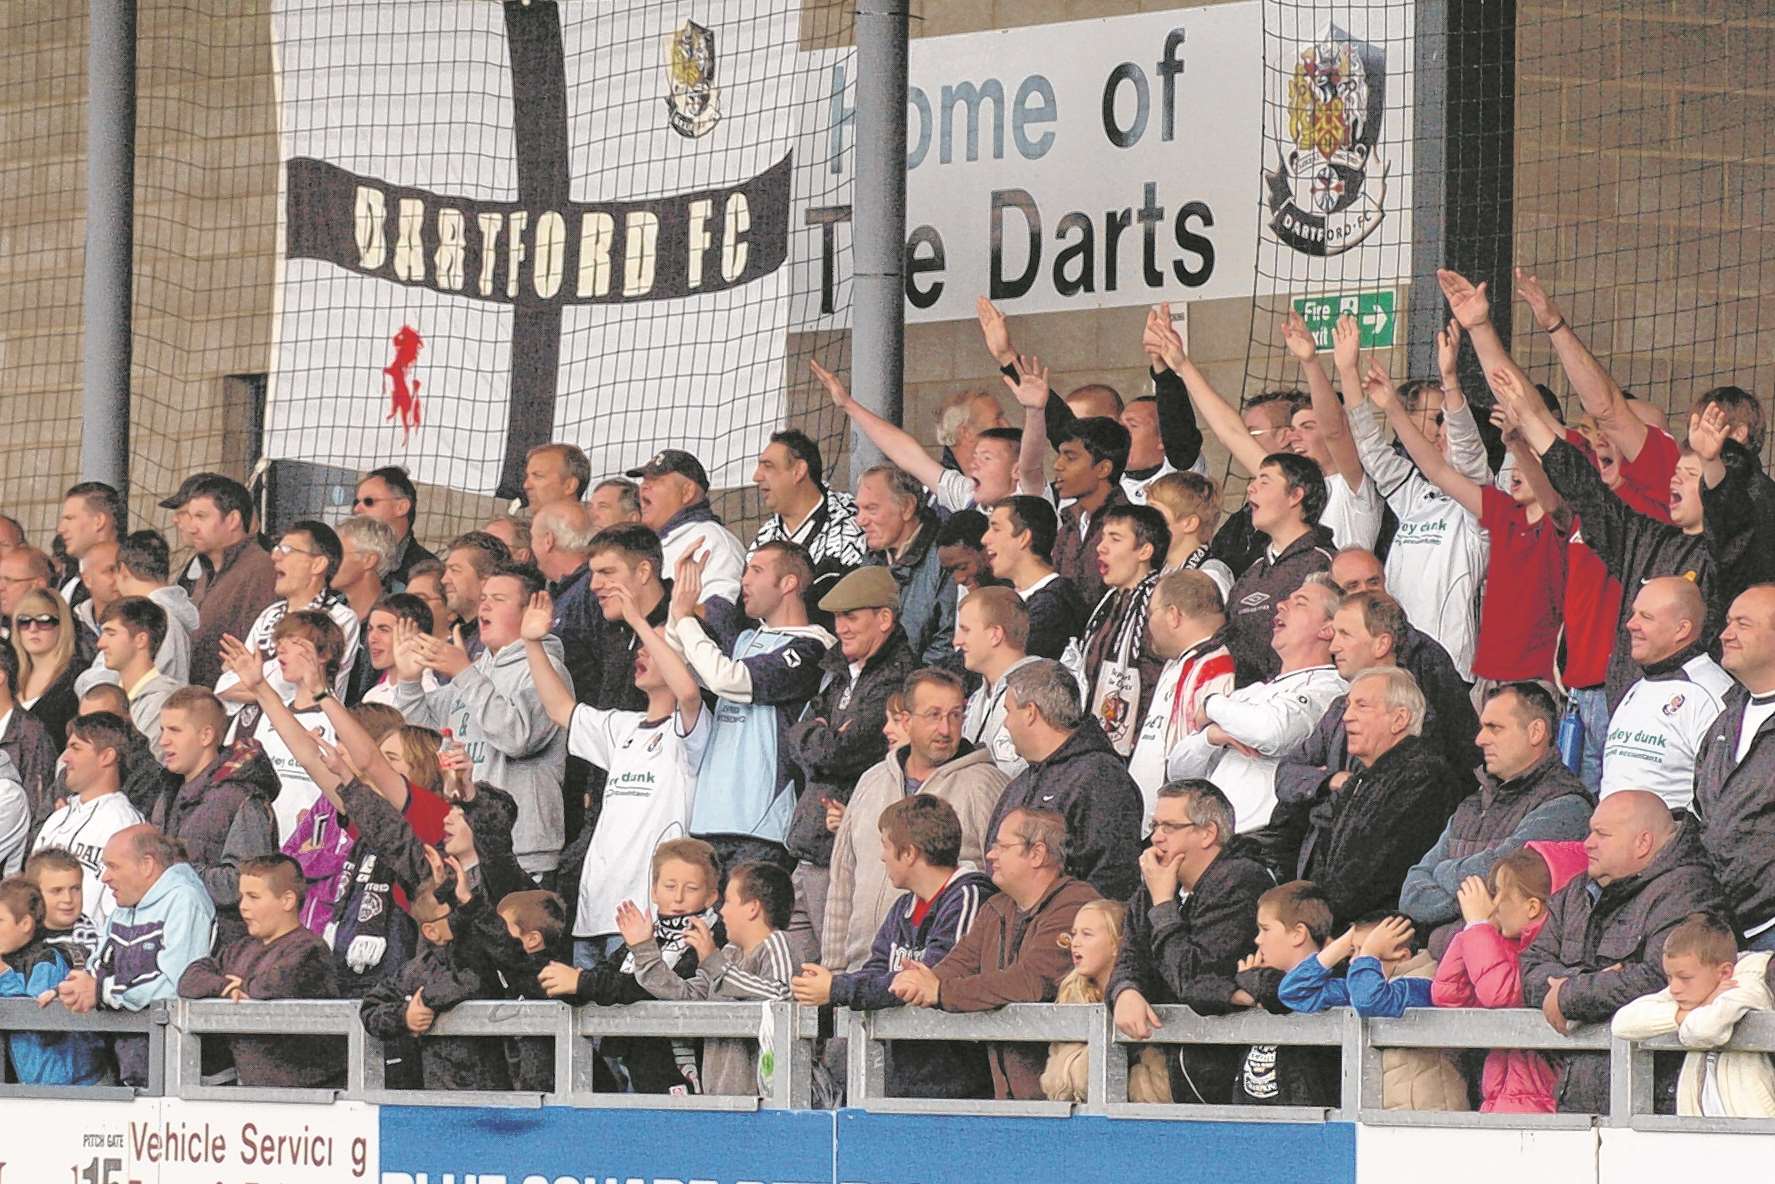 Dartford v Lowestoft in the FA Cup in 2010. Reporter Tom Acres is in there somewhere...